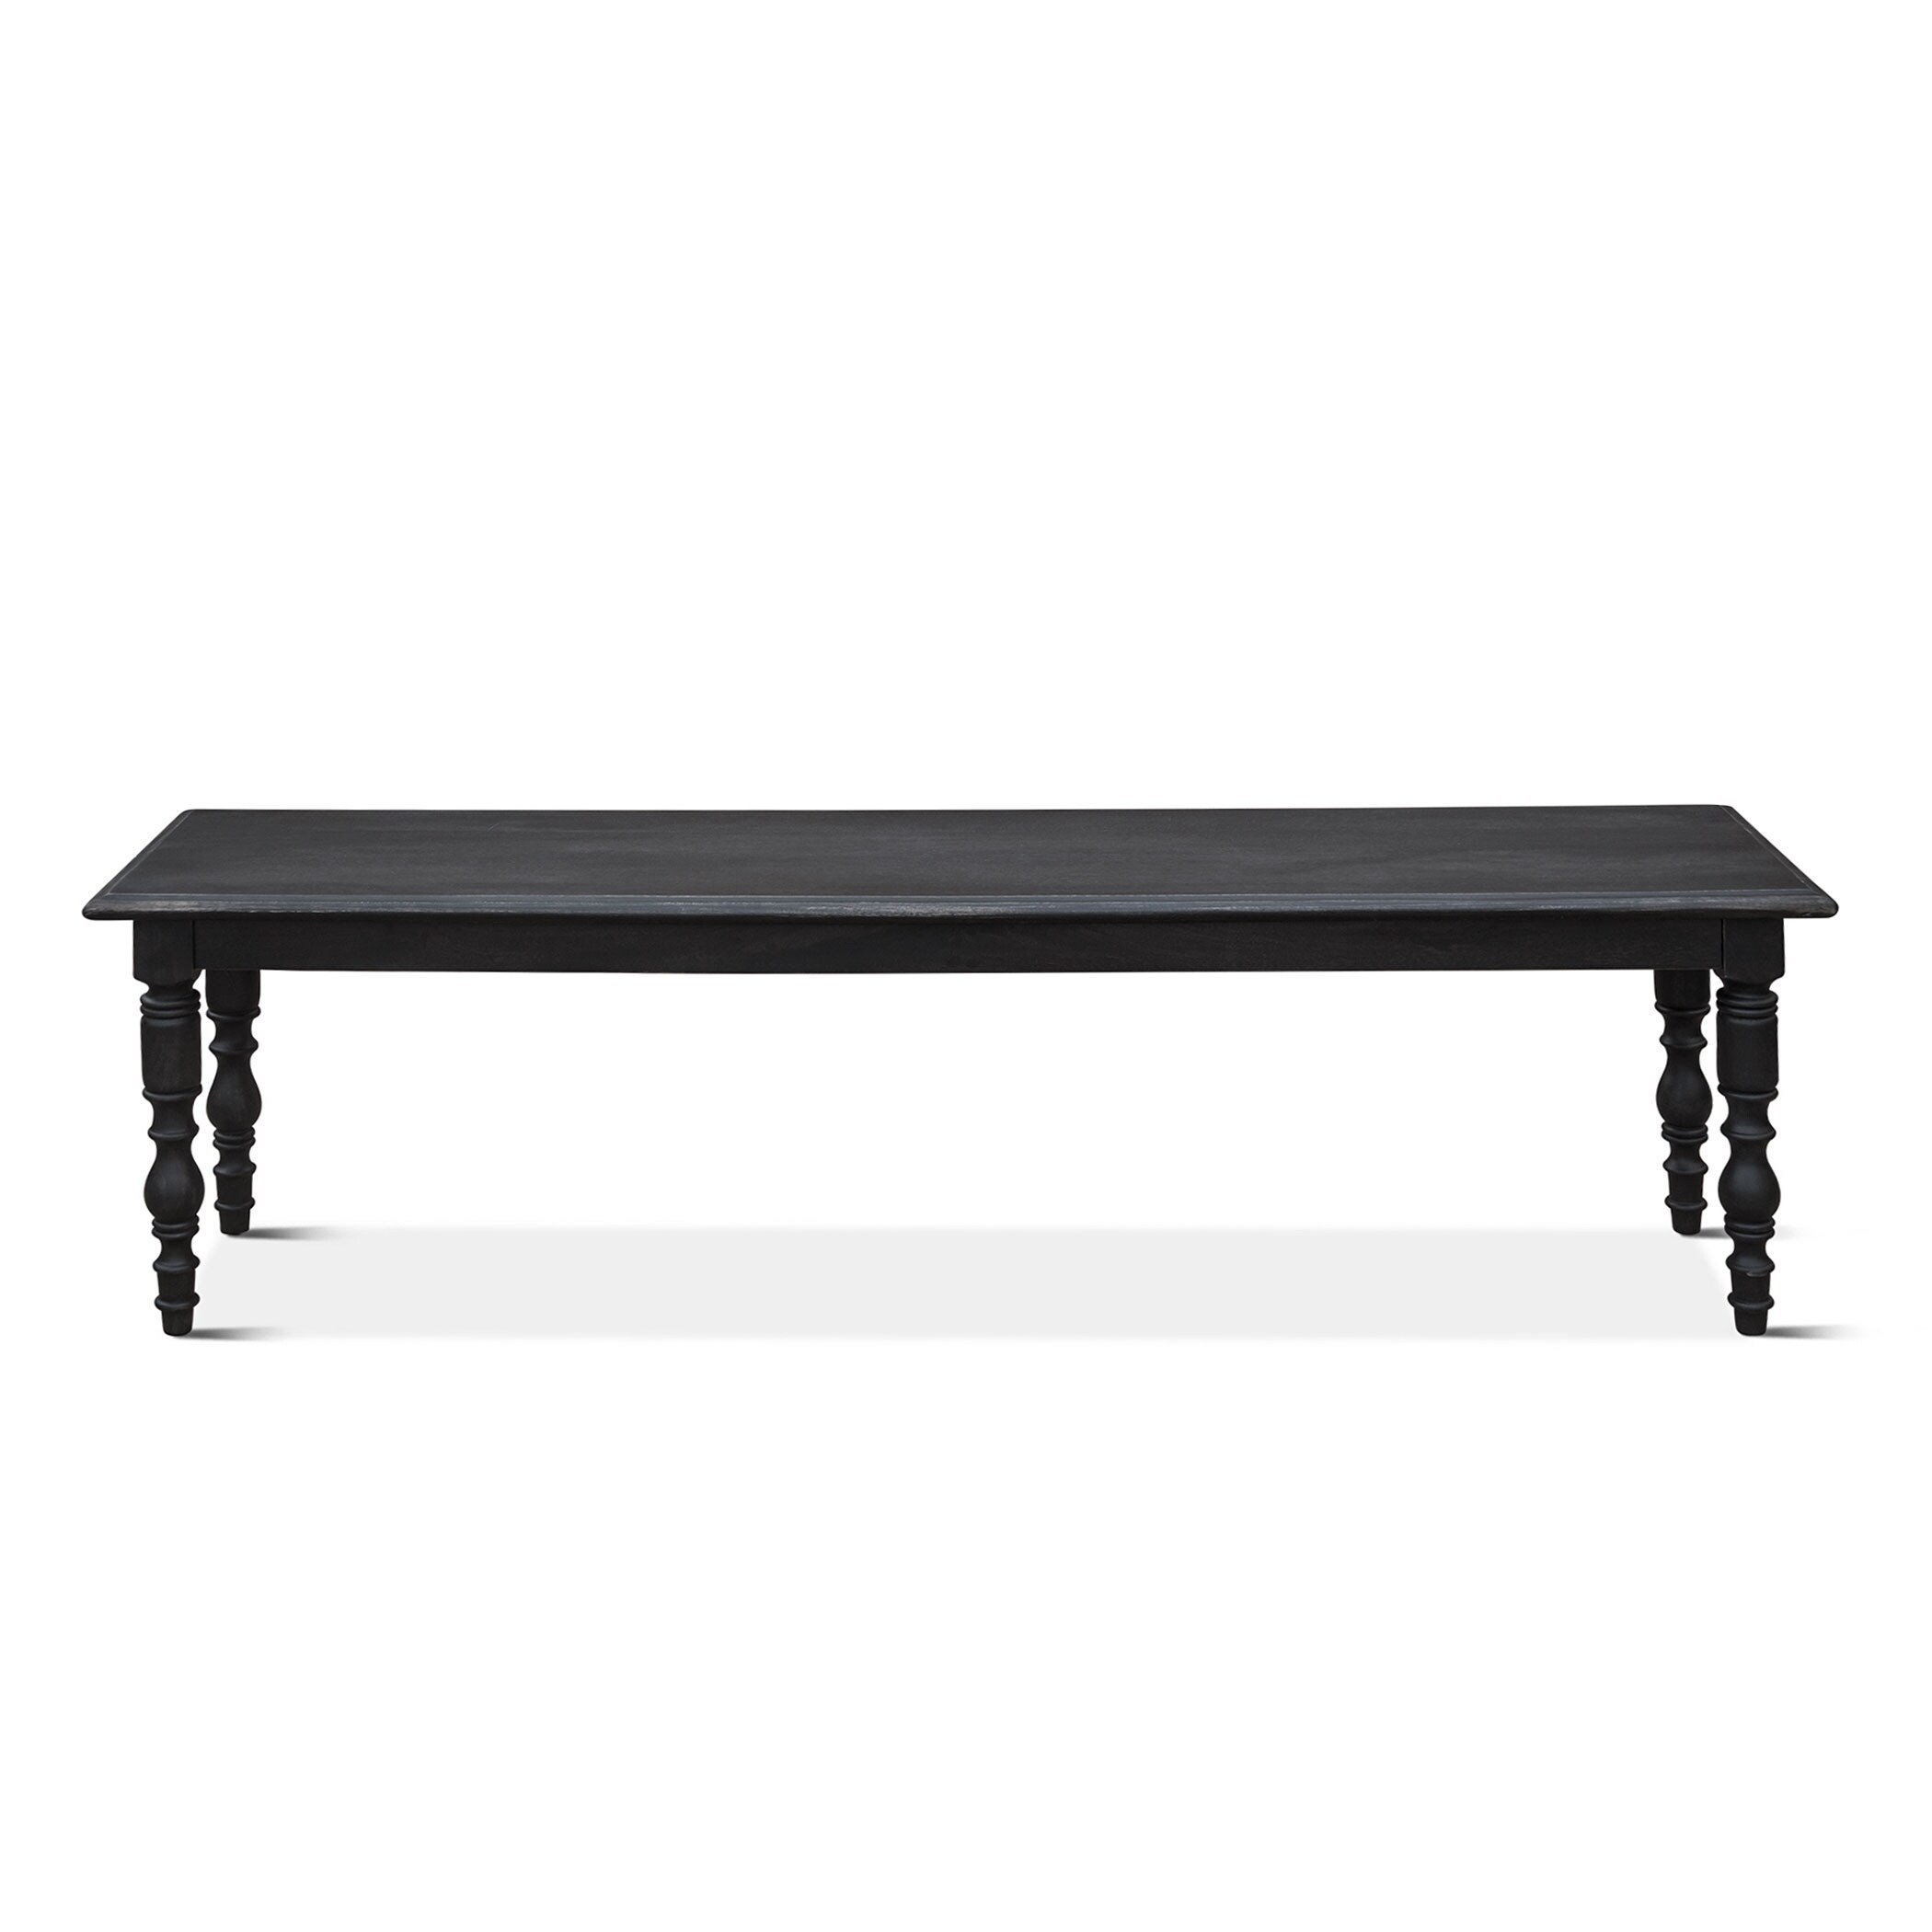 Featured image of post Black Farmhouse Dining Bench / We believe that farmhouse dining bench exactly should look like in the picture.